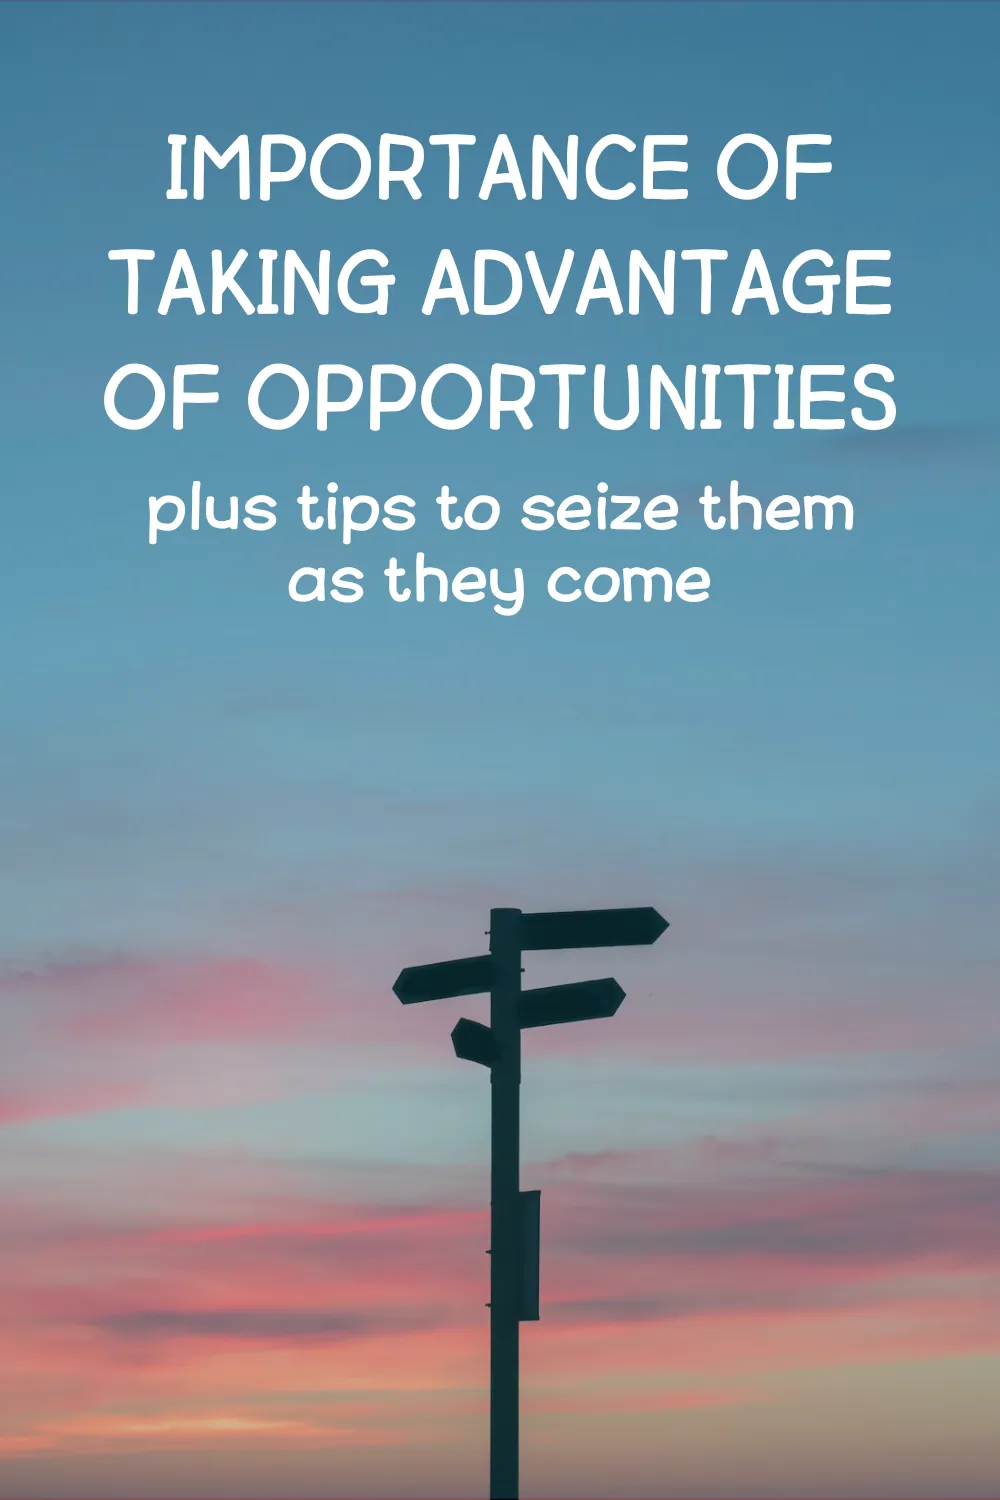 How to take advantage of opportunities - 7 helpful tips 3